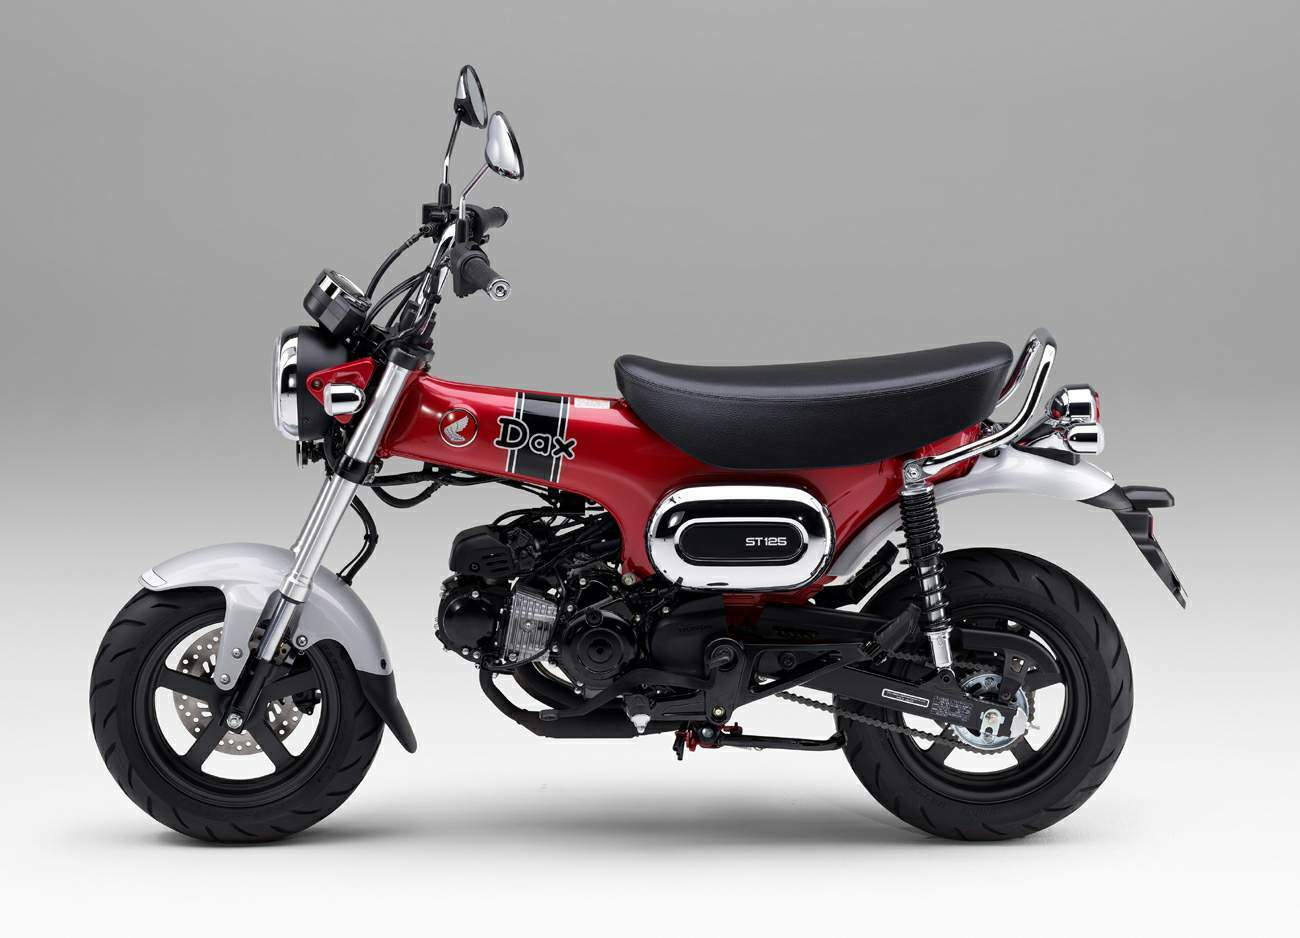 Honda ST125 Dax technical specifications